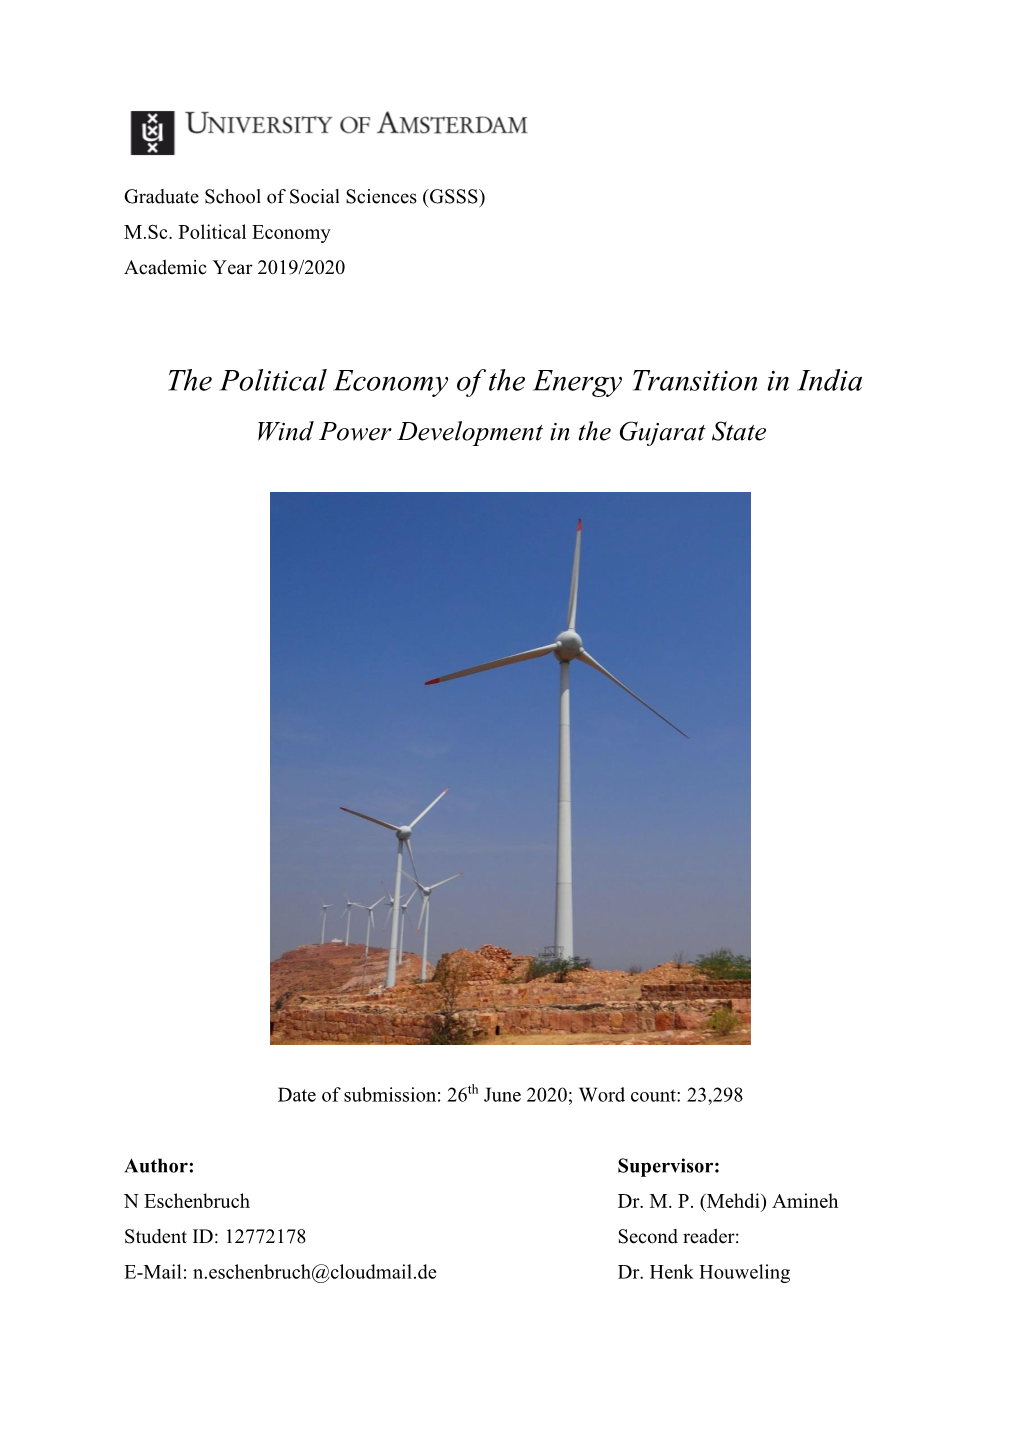 The Political Economy of the Energy Transition in India Wind Power Development in the Gujarat State